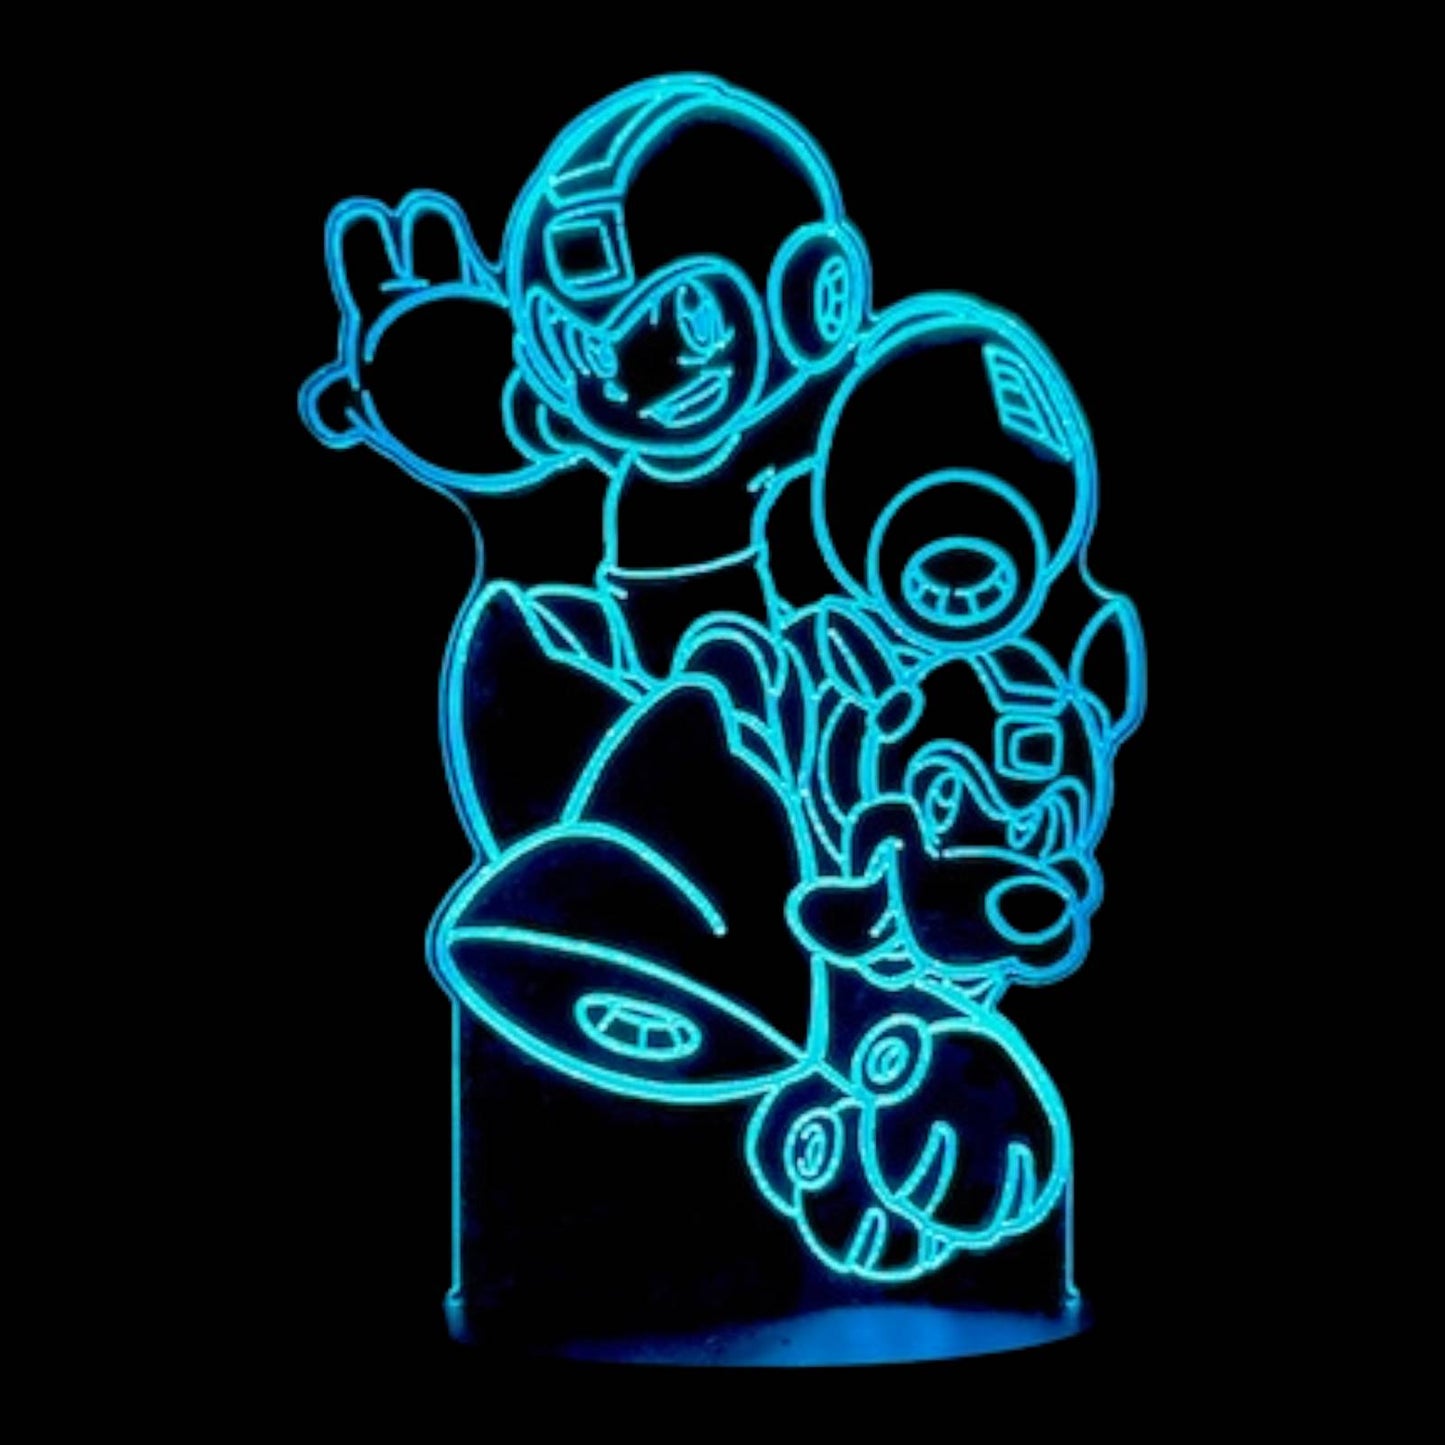 Mega Man 3D LED Night-Light 7 Color Changing Lamp w/ Touch Switch